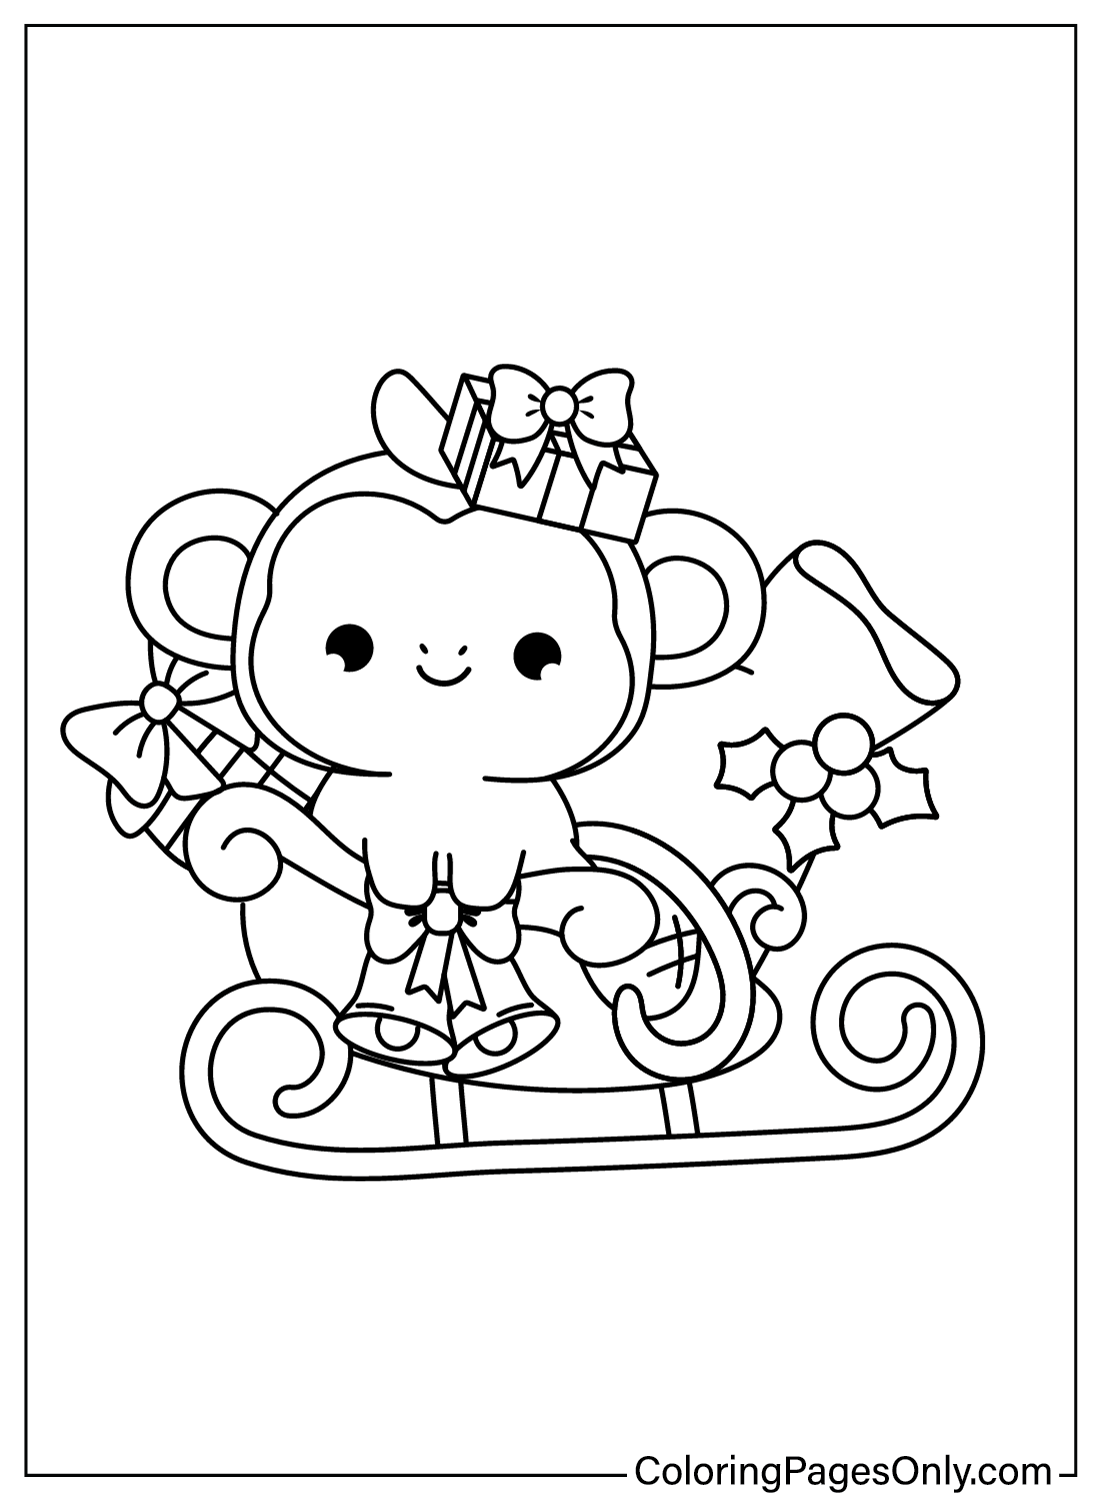 Christmas Monkey Coloring Pages